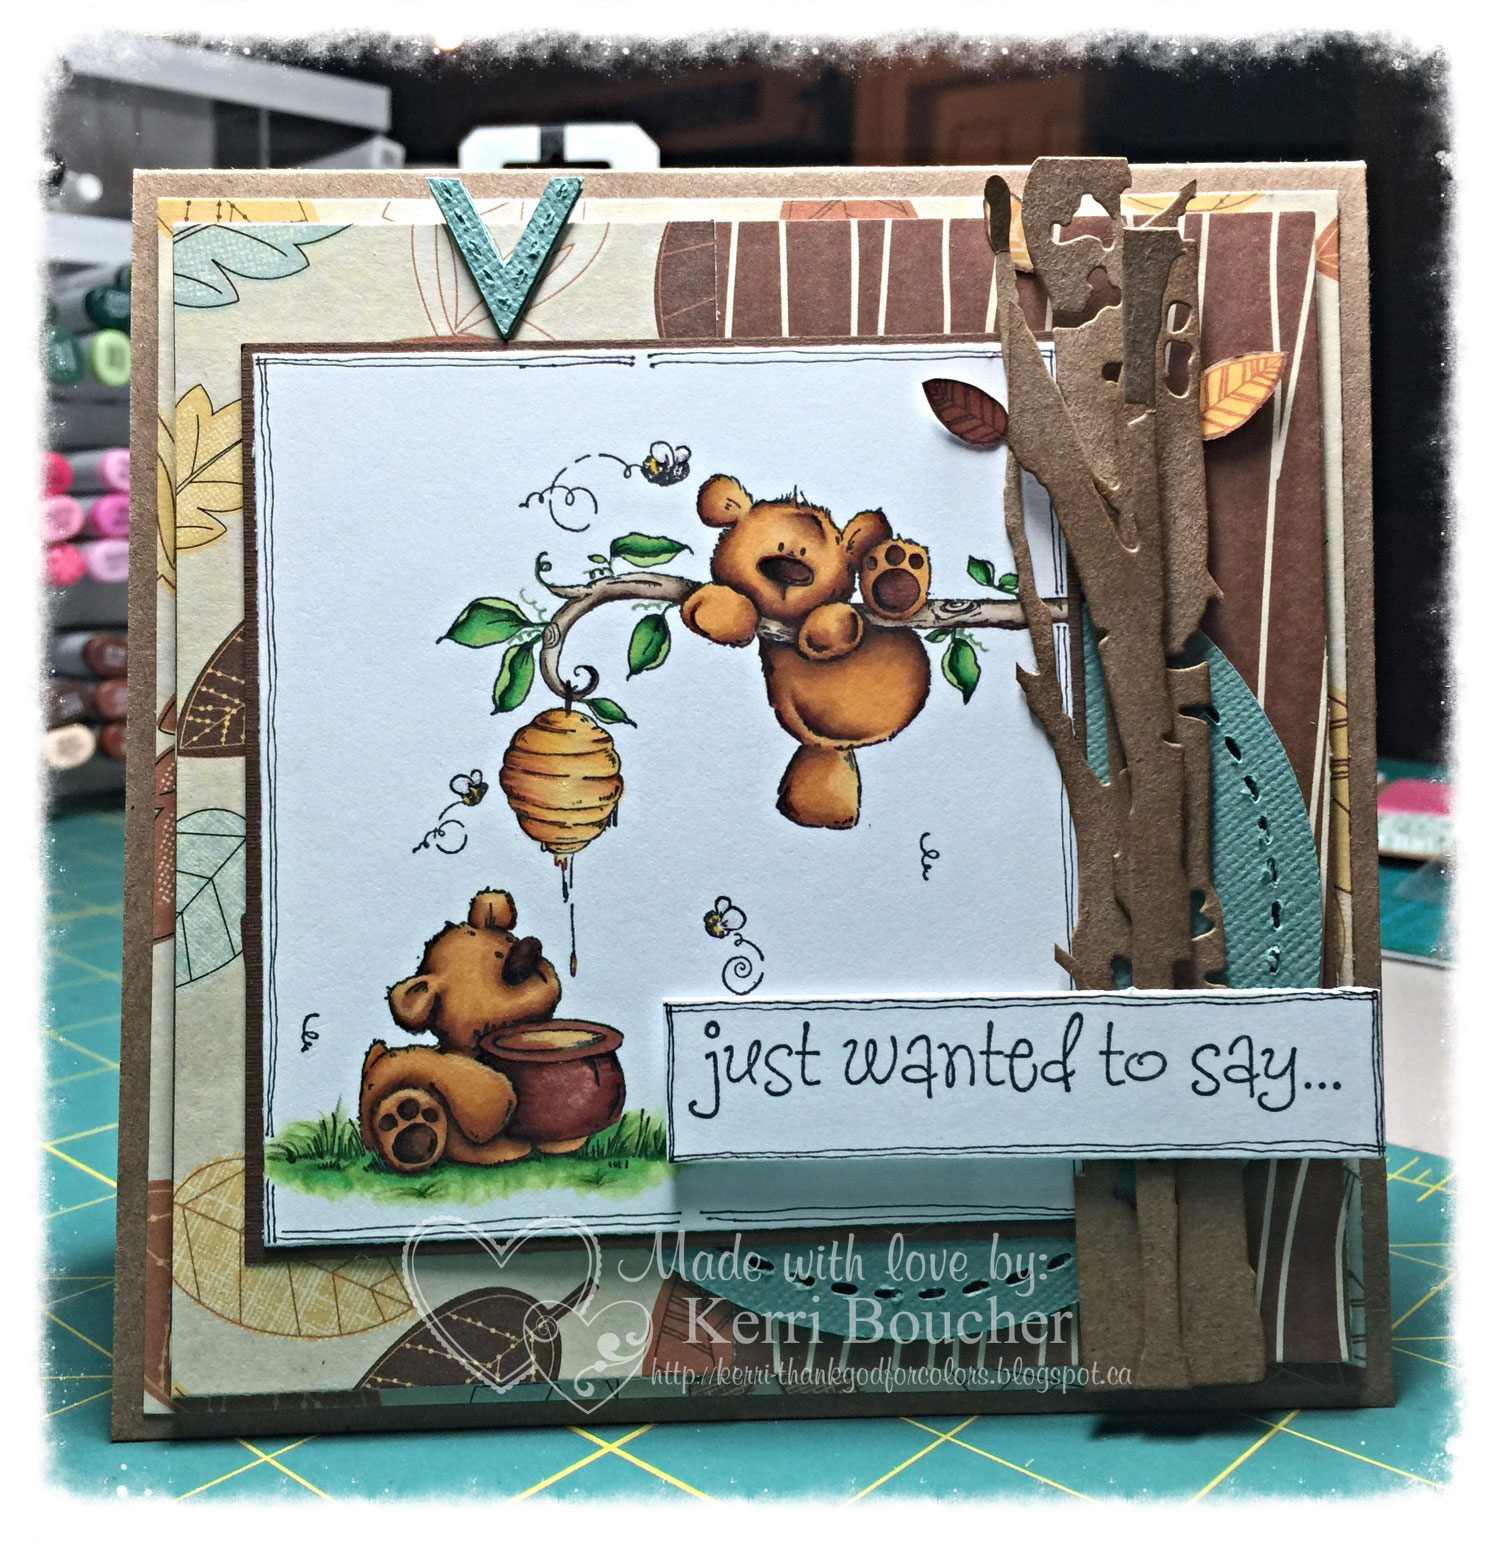 Stamping Bella HoneyBear Stuffies rubber stamp. Click through to read the blog post for inspiration!